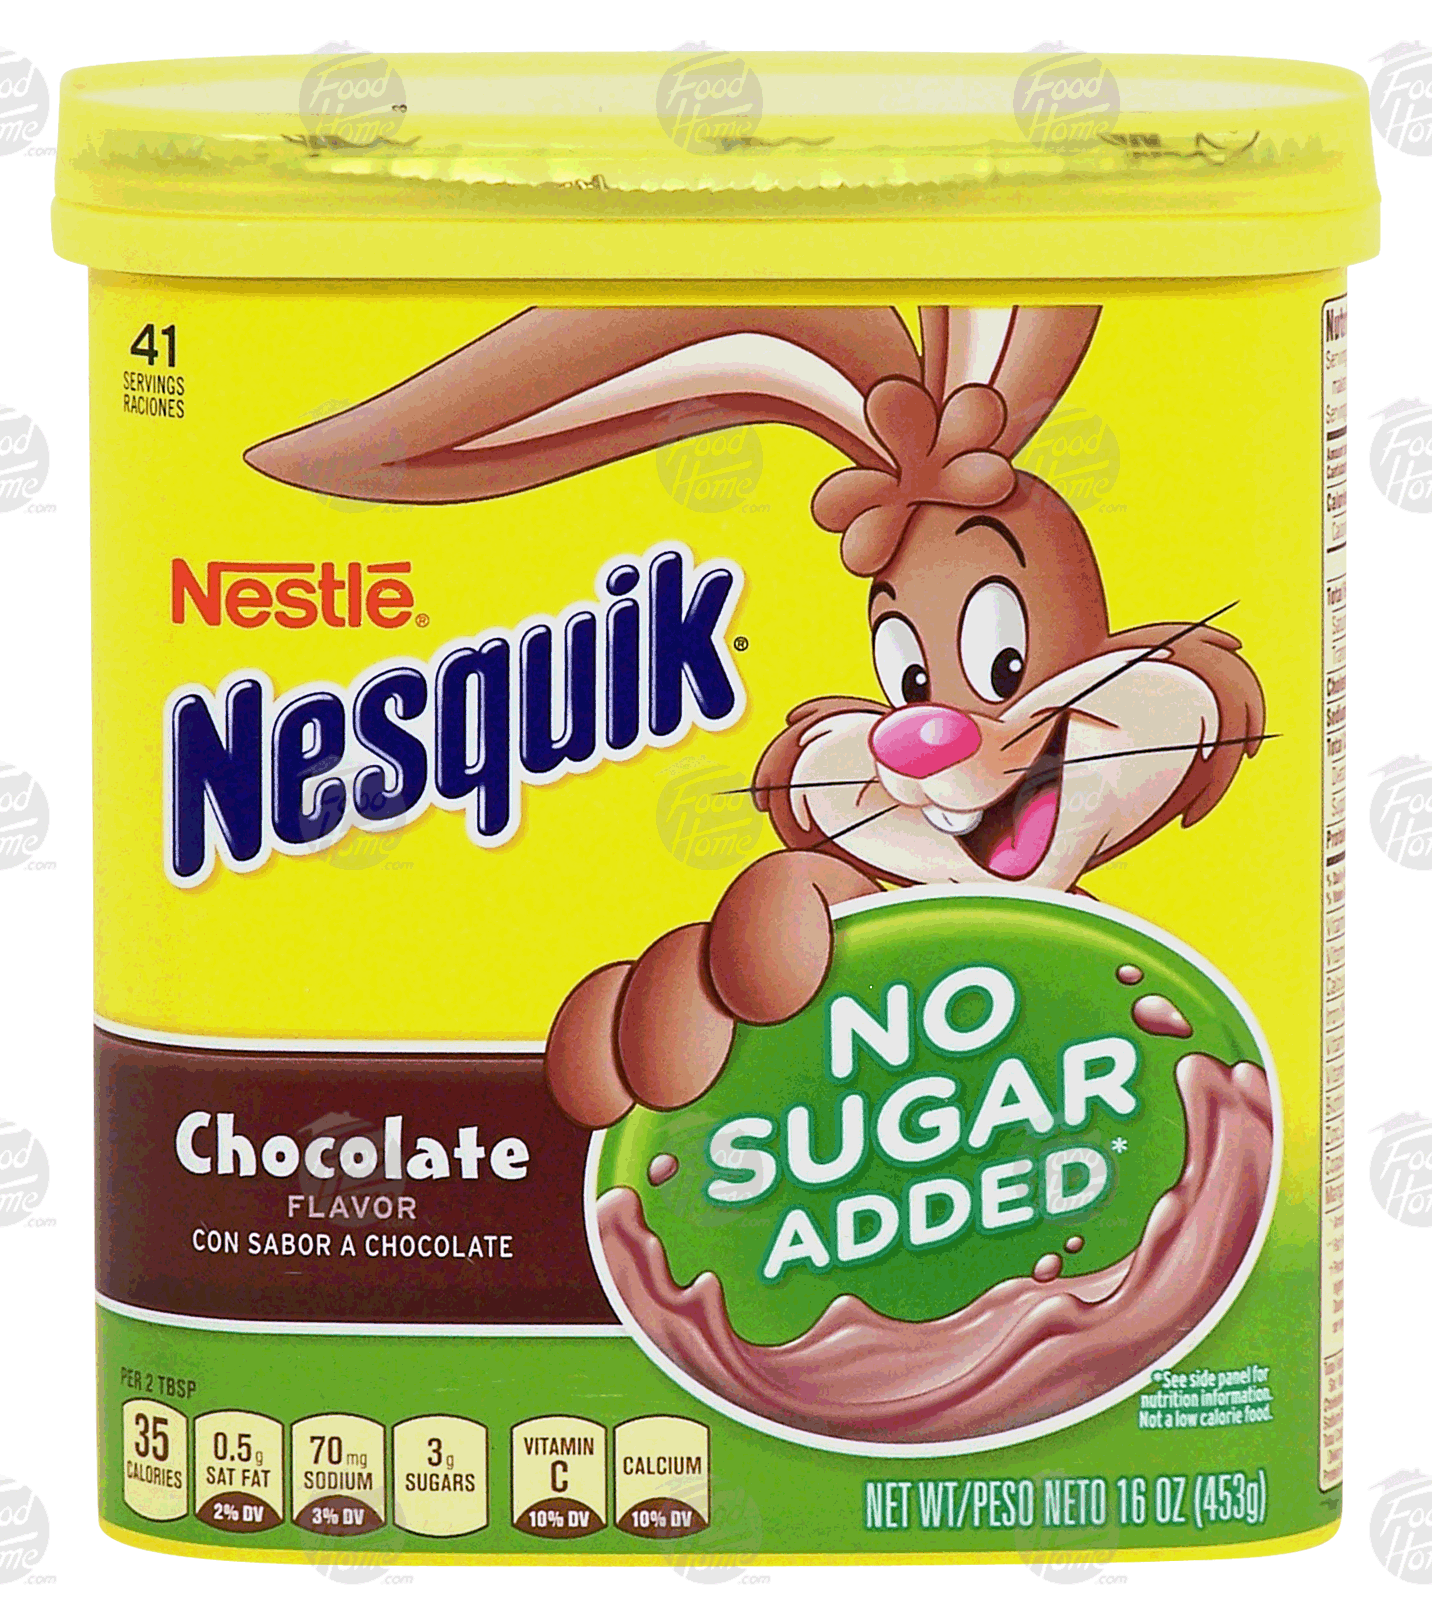 Nestle Nesquik chocolate no sugar added powder, 41 servings Full-Size Picture